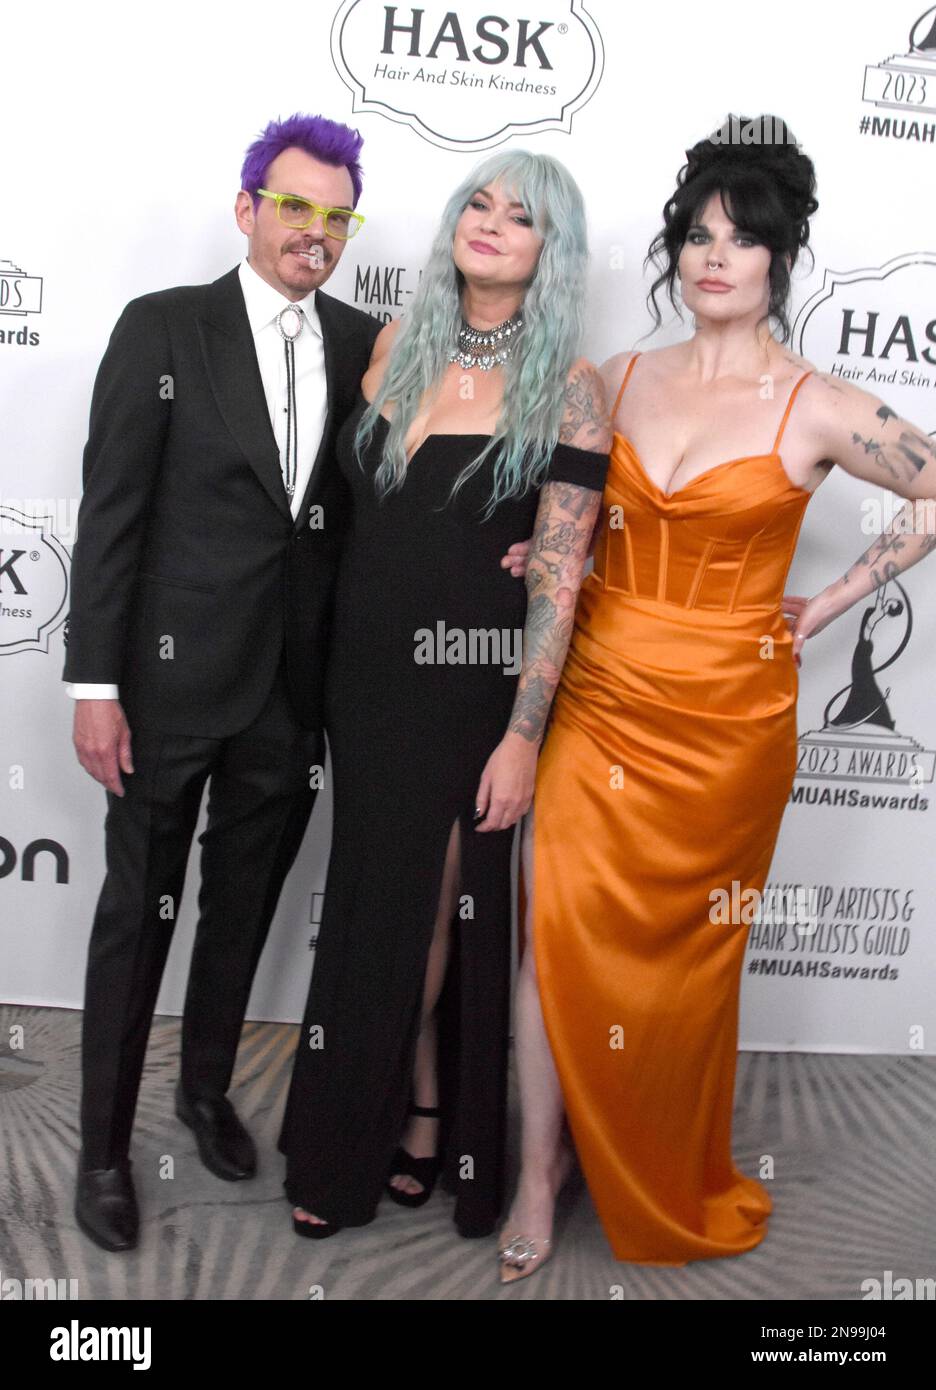 Beverly Hills, California, USA 11th February 2023 (L-R) Hair Stylists Alyn R. Topper, Erica Adams and Lauren McKeever attend the 10th Annual Make-Up Artists & Hair Stylists Guild Awards at The Beverly Hilton Hotel on February 11,2023 in Beverly Hills, California, USA. Photo by Barry King/Alamy Live News Stock Photo